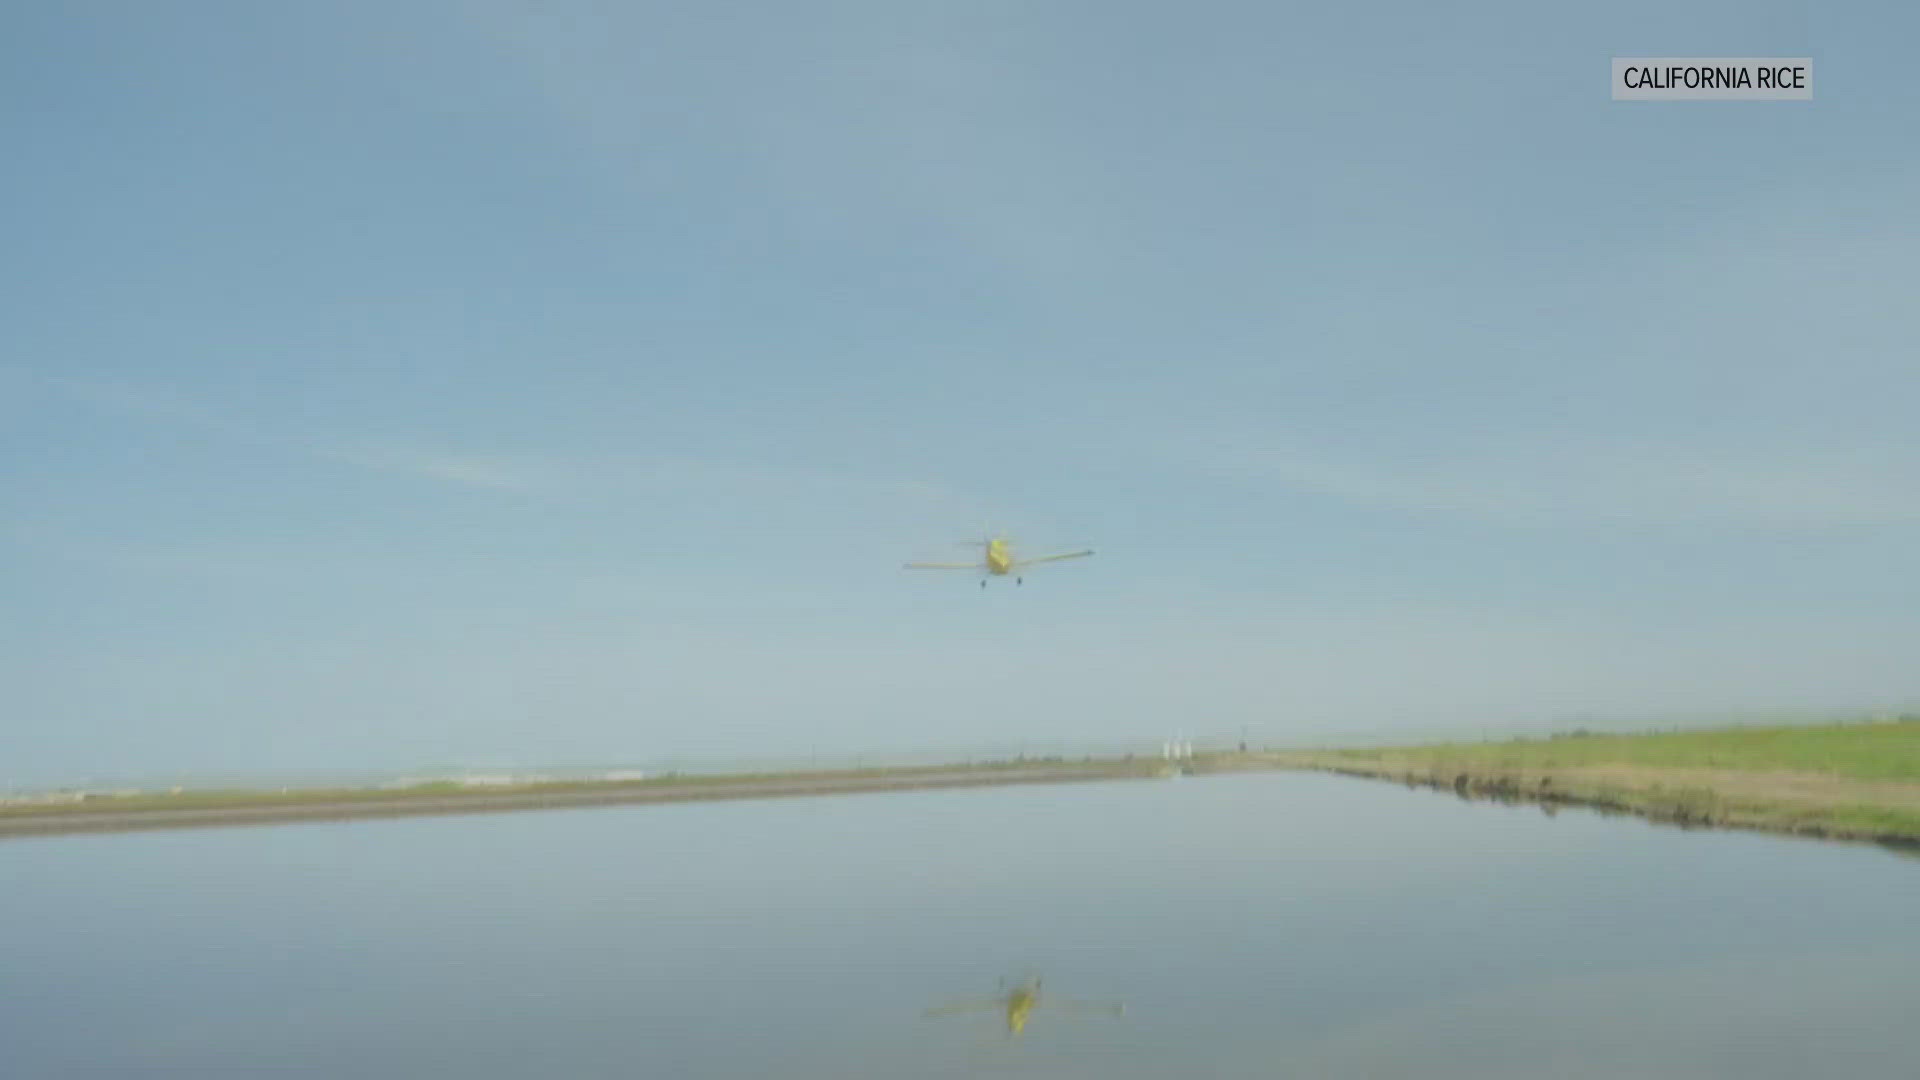 Planes flying at 100 mph drop rice seeds into fields flooded with about five inches of water, planting the years crop.